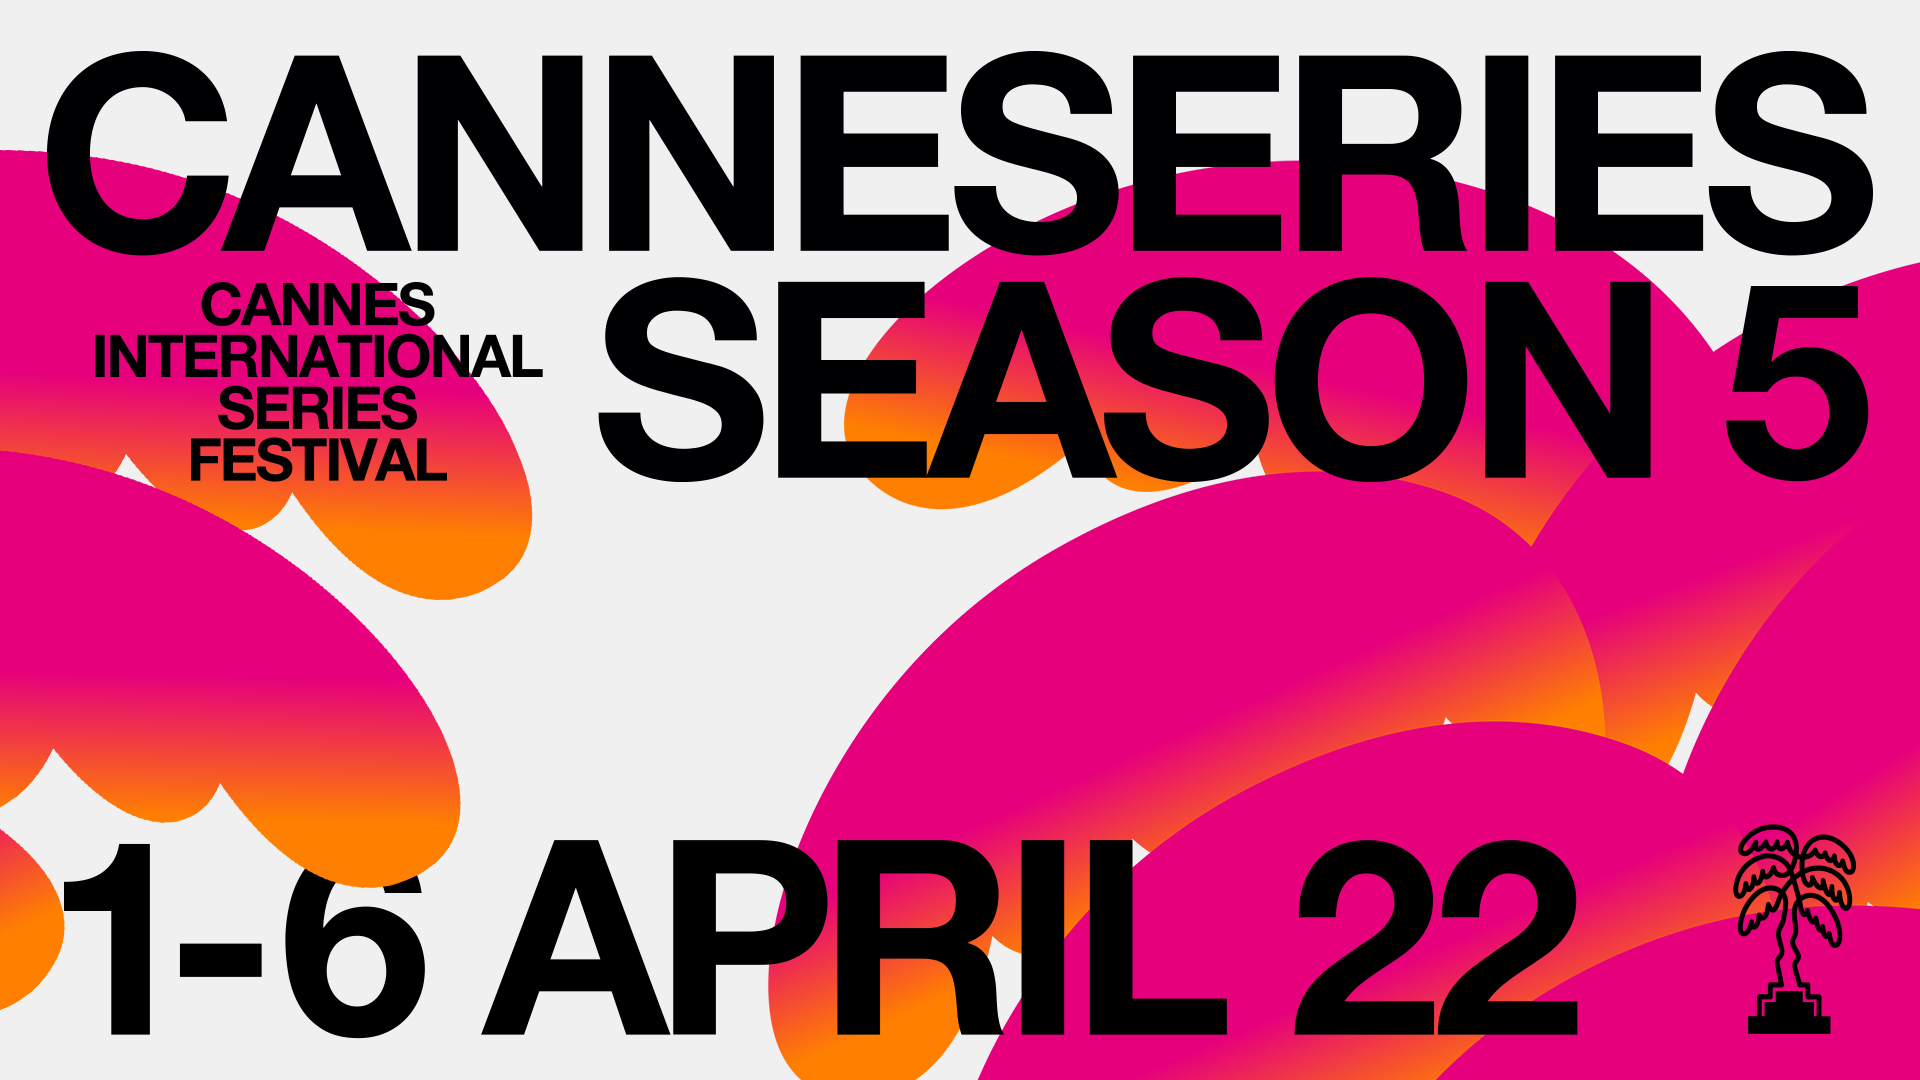 CANNESSERIES trailer for Season 5, the festival starts April 1st